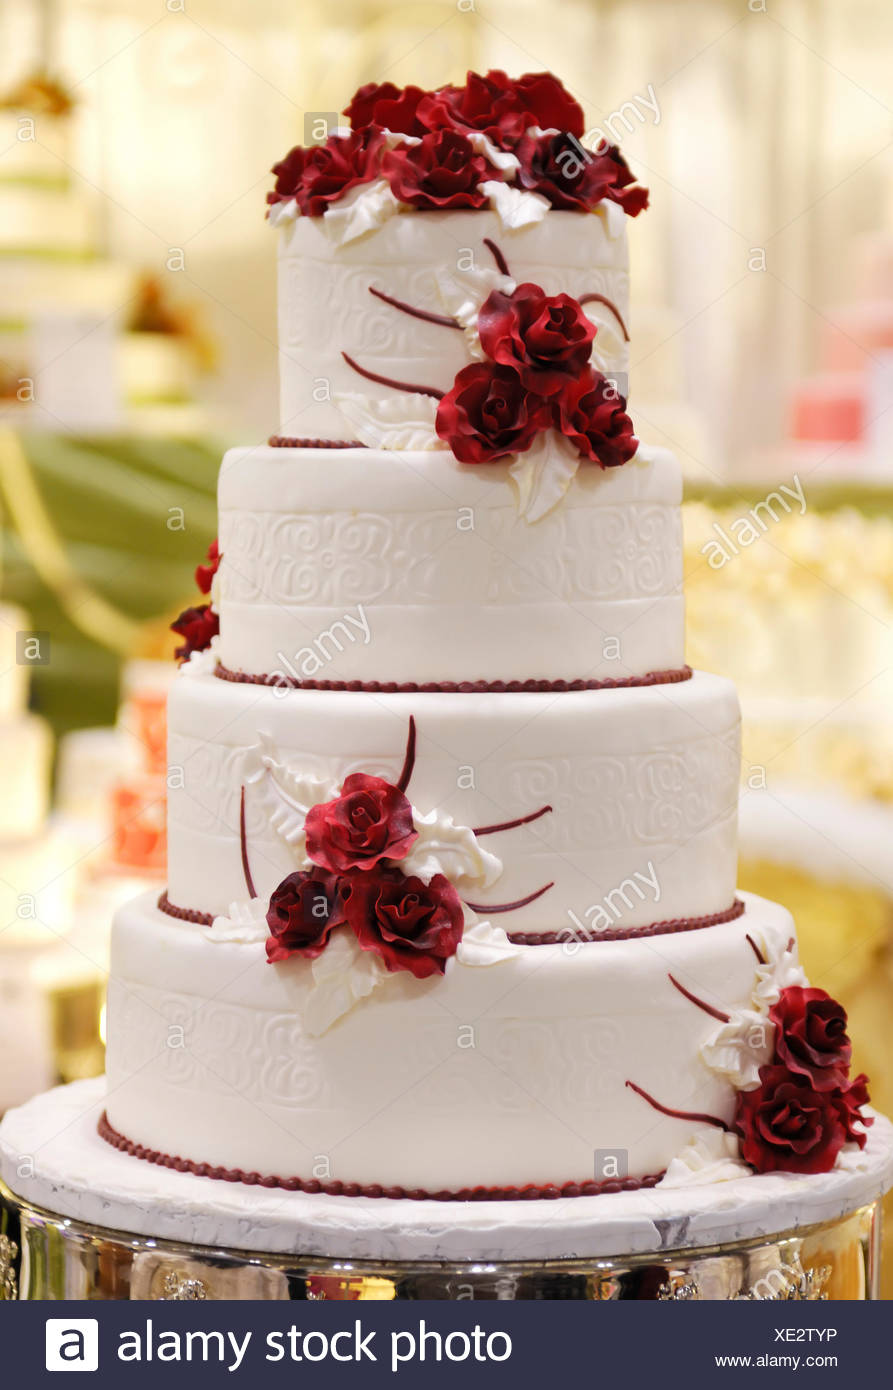 Tiered Wedding Cake Decorated With Red Roses Stock Photo